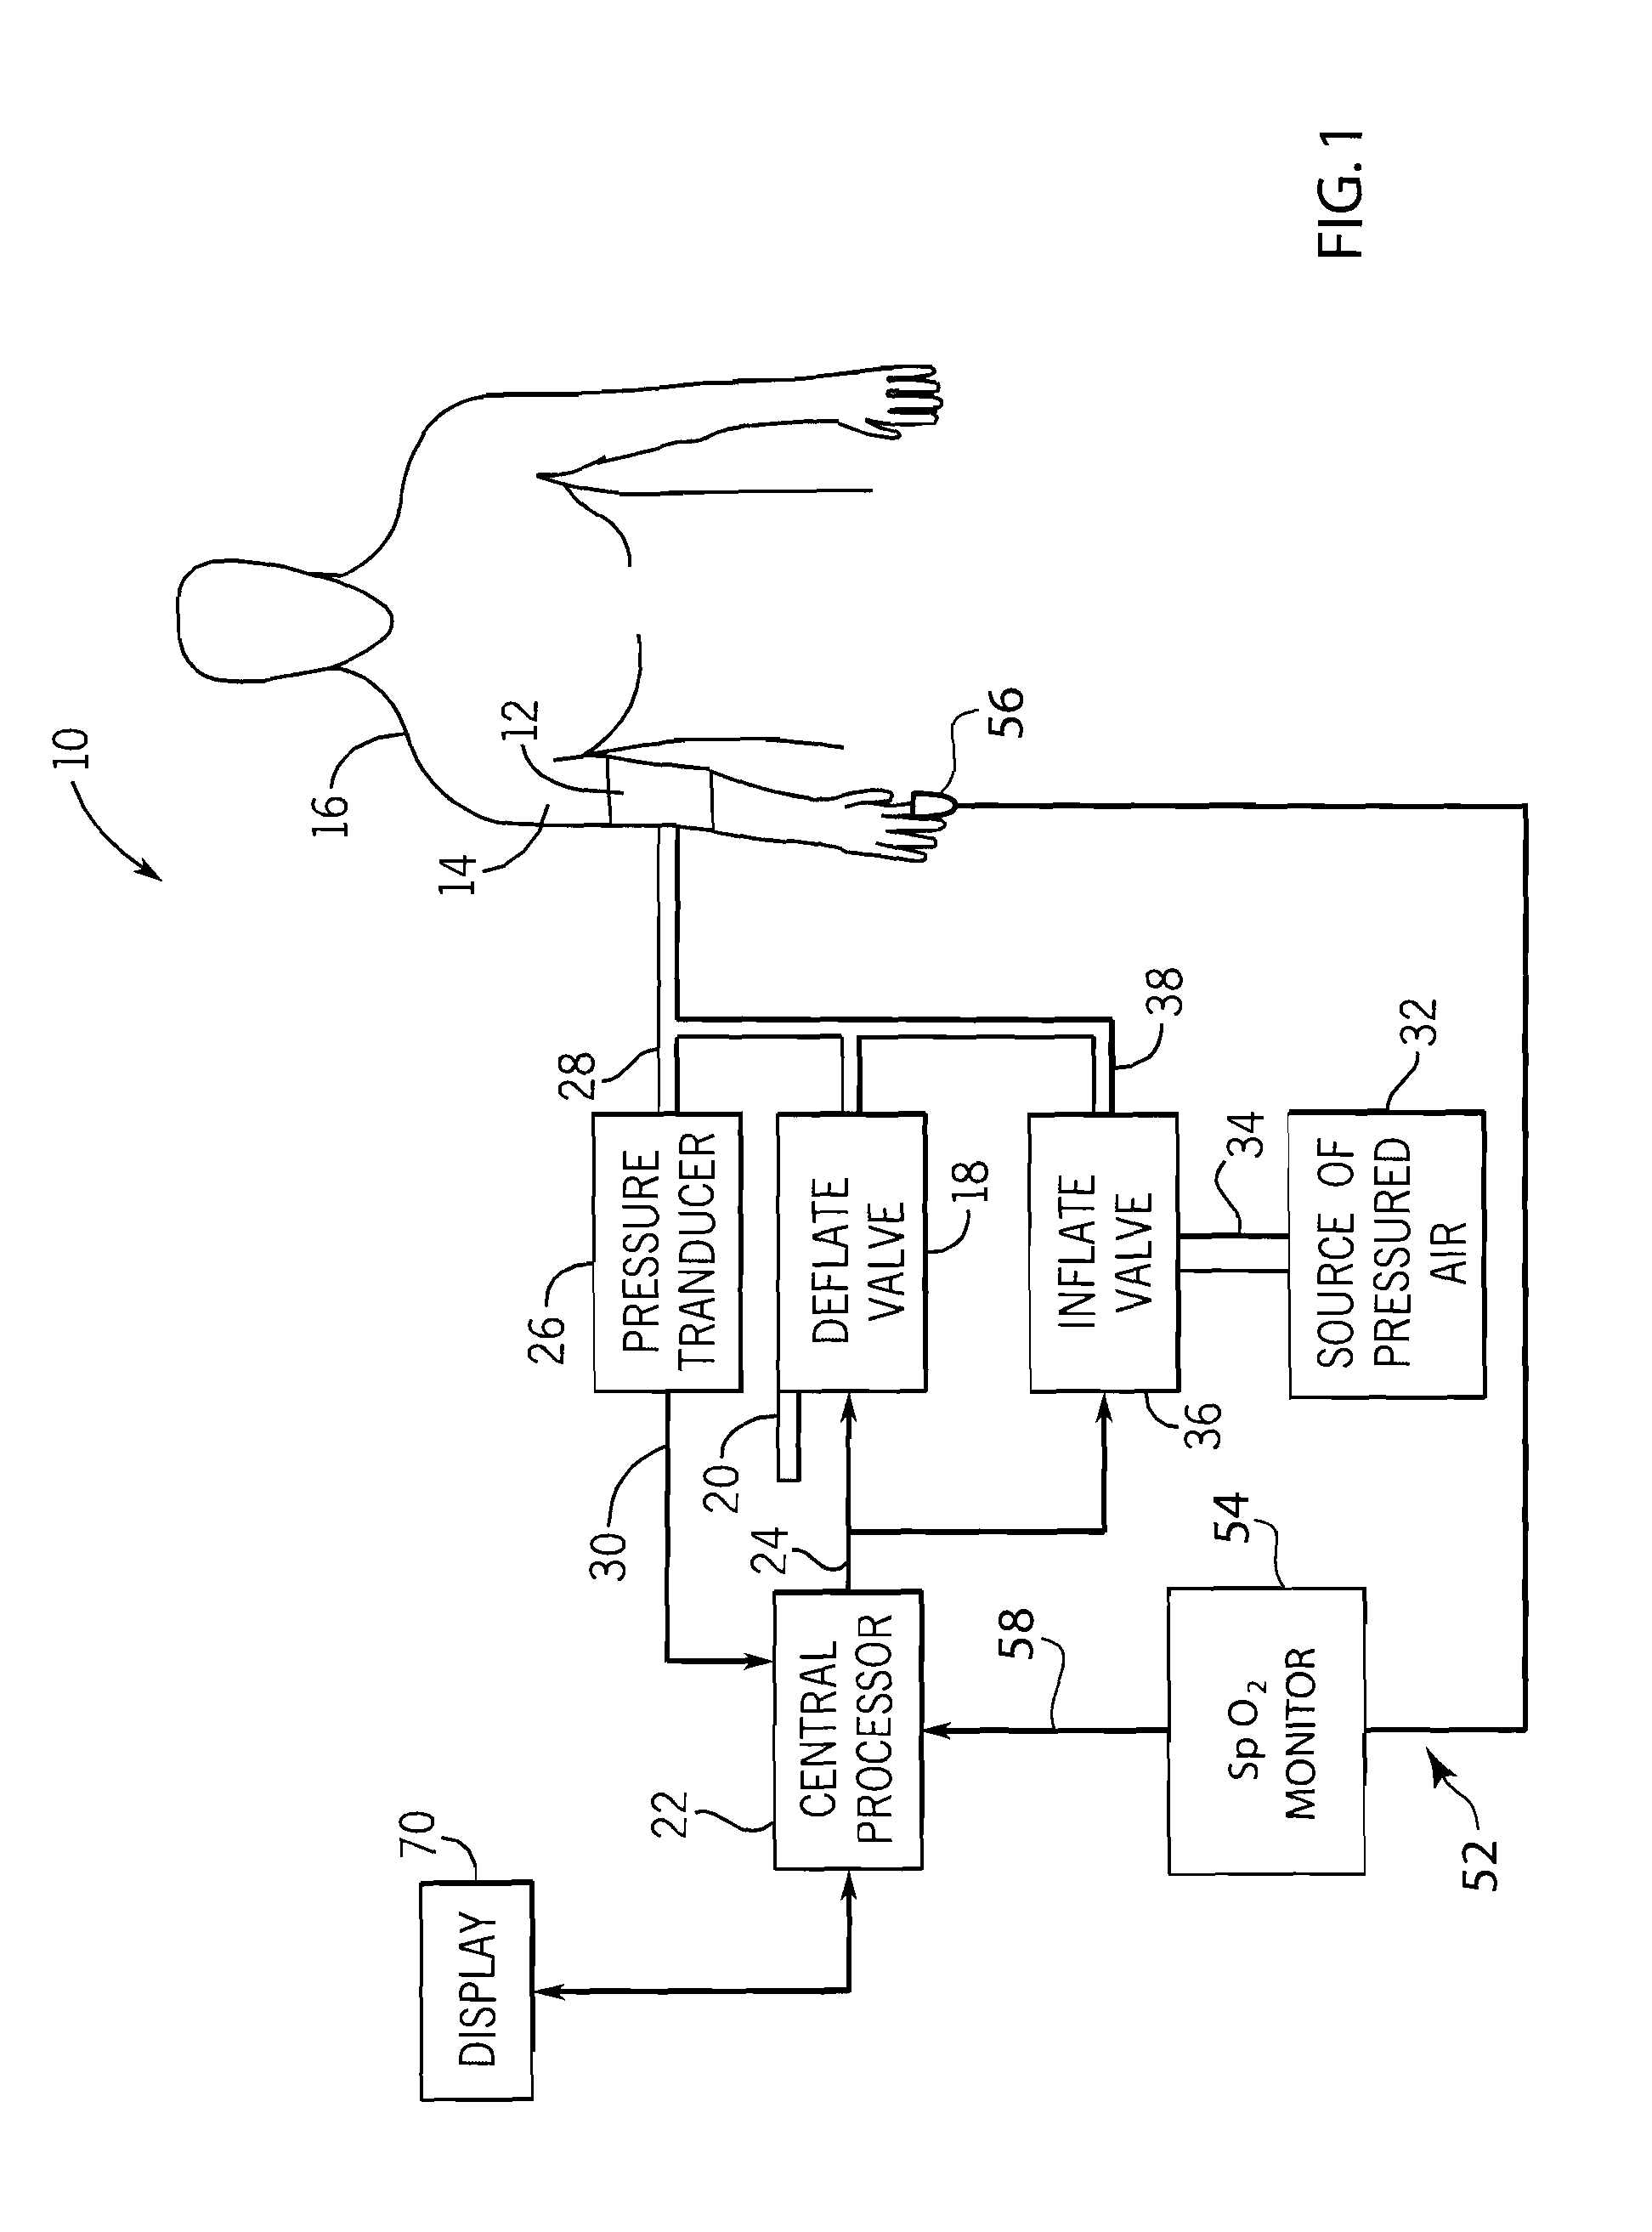 Method and system of determining NIBP target inflation pressure using an SpO2 plethysmograph signal